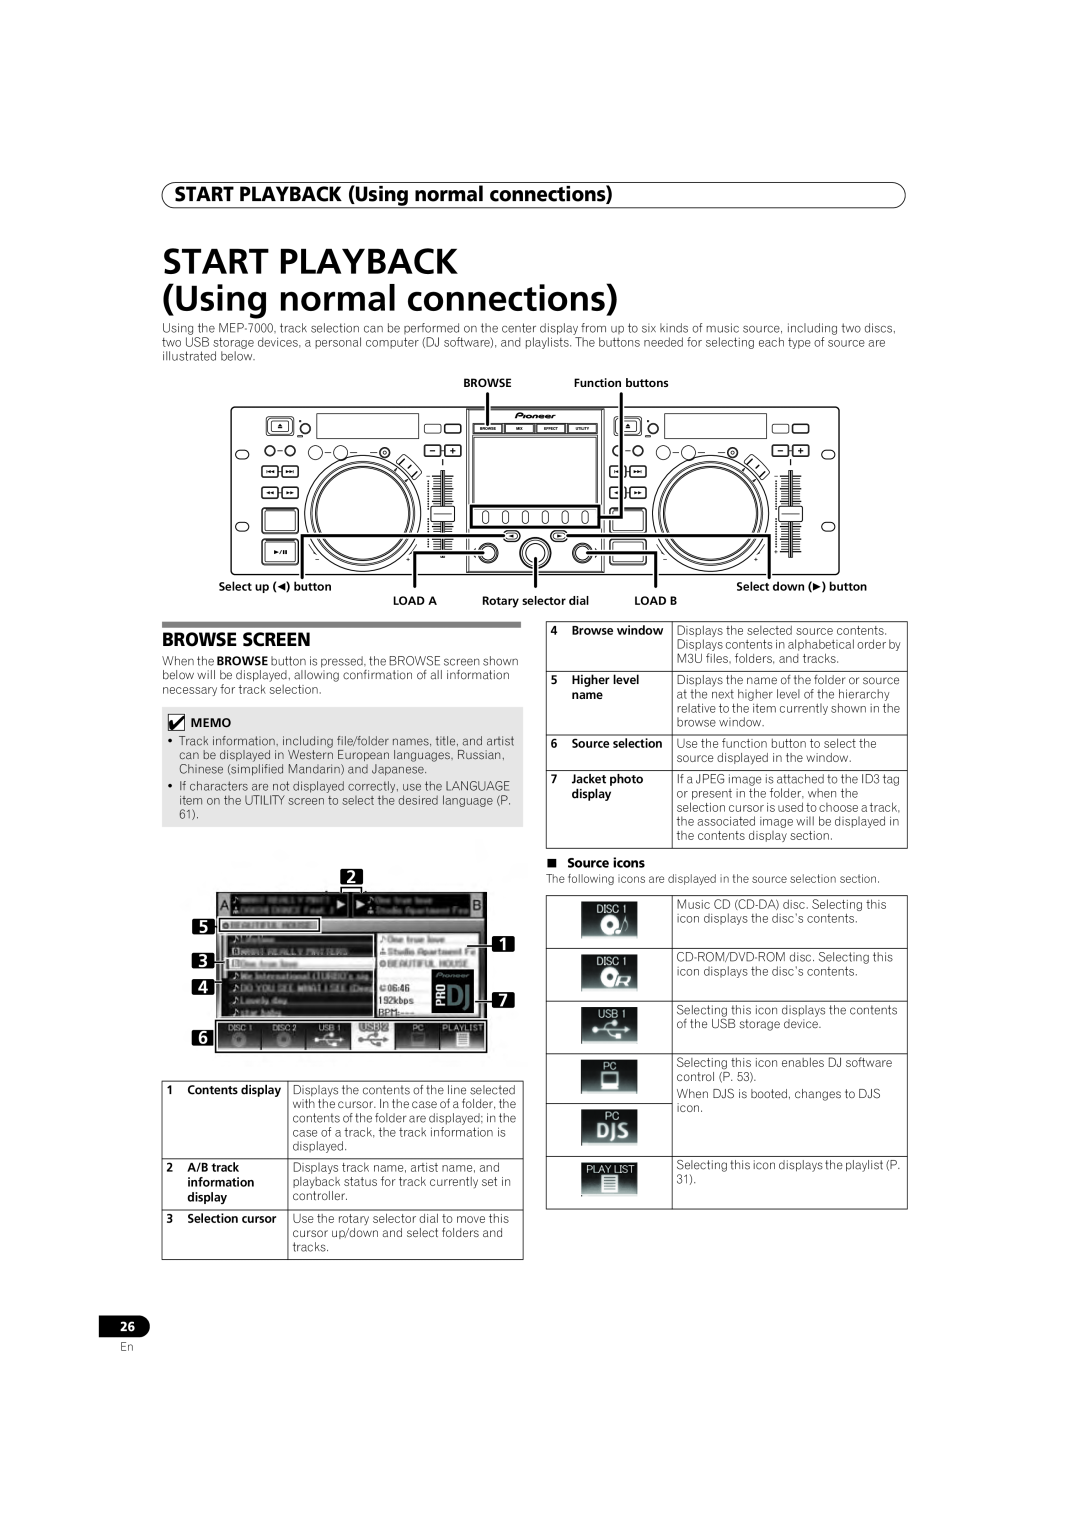 Pioneer MEP-7000 operating instructions START PLAYBACK Using normal connections, Browse Screen, Source icons 